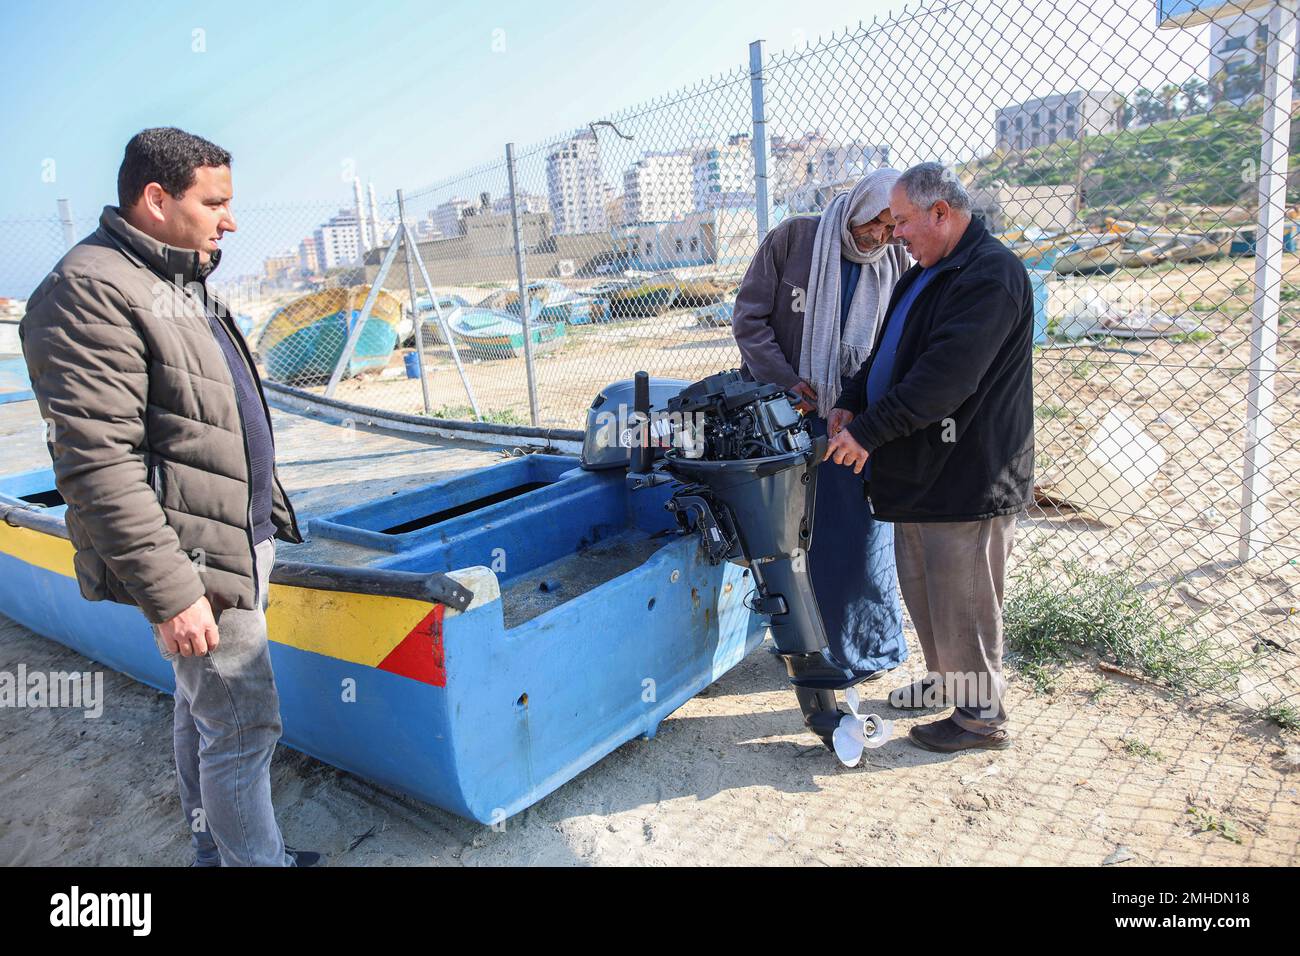 A local technical worker stands with a Palestinian fisherman near his fishing boat after installing a new engine on it at the Gaza seaport in Gaza City. In the last week, permitted the import of 12 outboard engines, said the United Nations. Israel had previously barred their entry based on concern they could prove 'dual use'. The repairs are taking place at an U.N.-supervised workshop on the beach, near the so-called 'Boat Graveyard' where dozens of rusty vessels have been piled up, abandoned after breakdowns. (Photo by Ahmed Zakot/SOPA Images/Sipa USA) Stock Photo